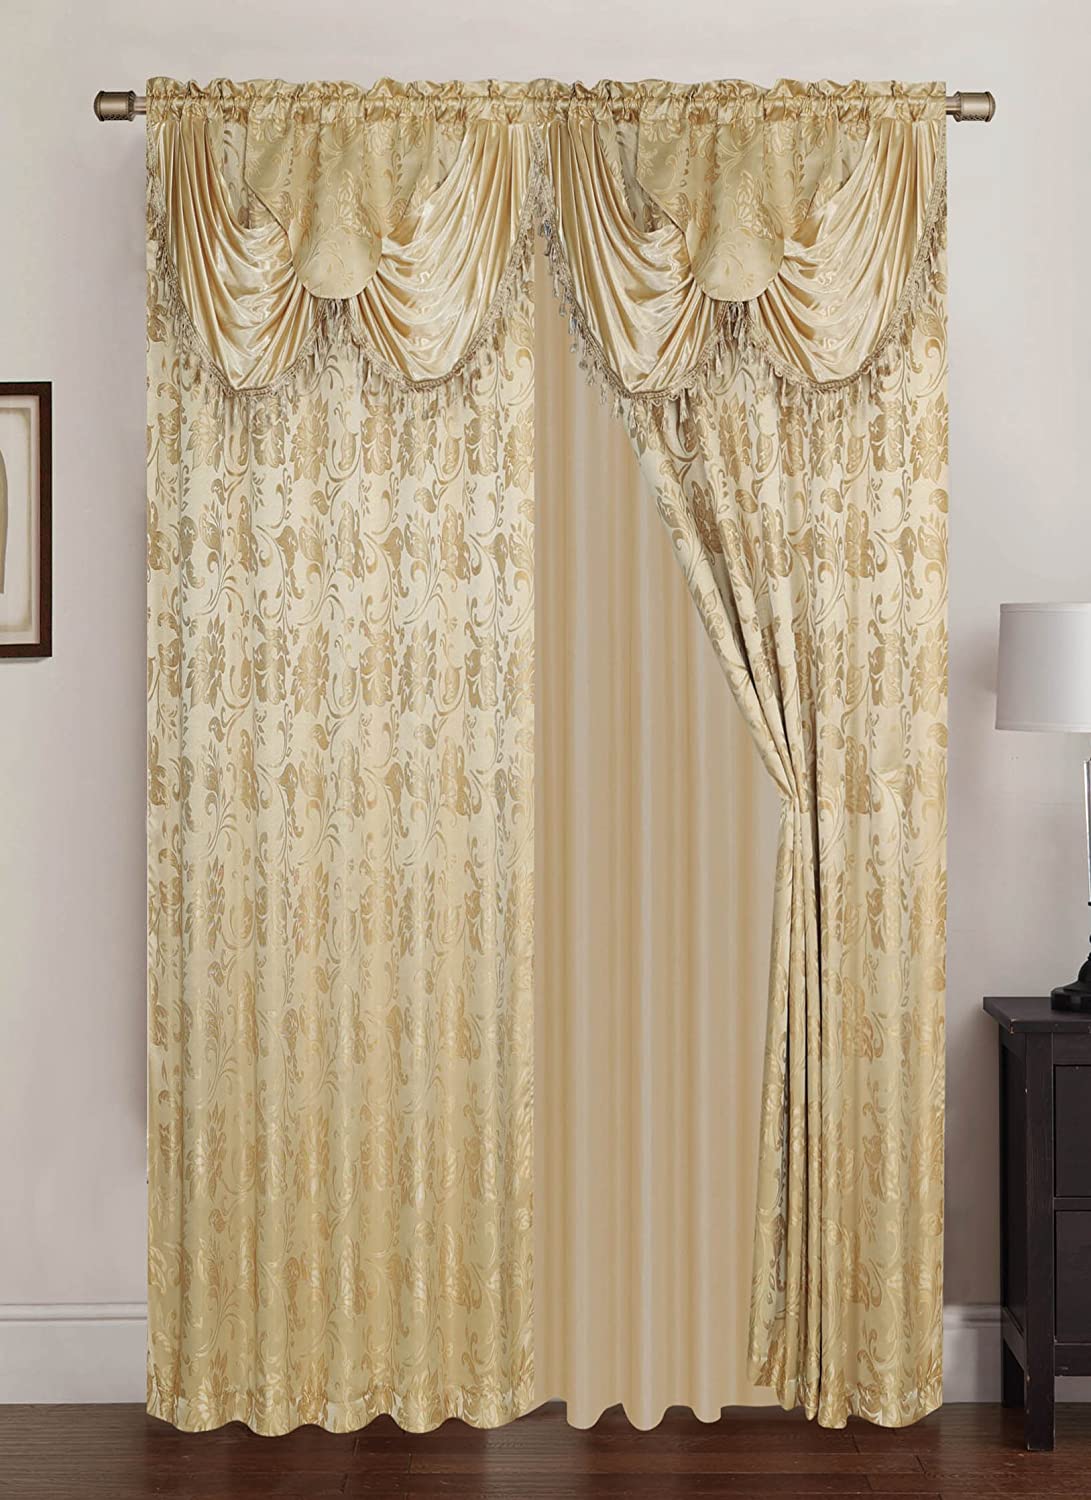 Clayton Jacquard 108 x 84 in. Rod Pocket Curtain Panel Pair w/ Attached 18 in. Valance, Blue (Set of 2) - Linen Universe Co.